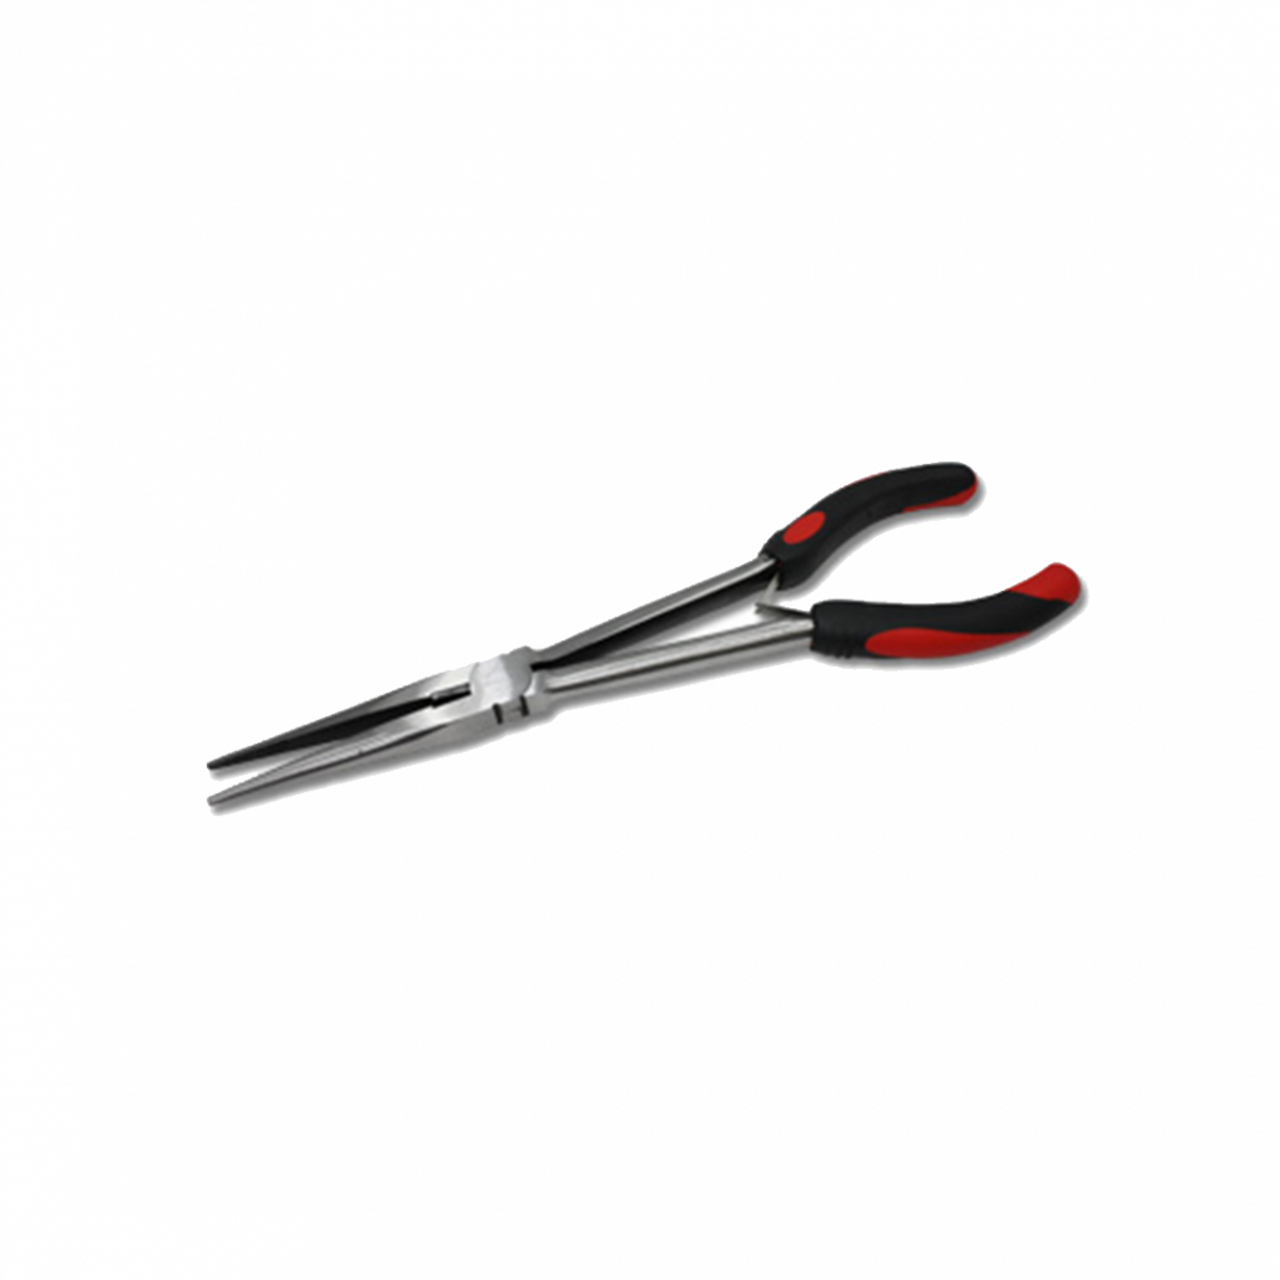 Plumtool Long Nose Pliers For Tap Valves 270Mm